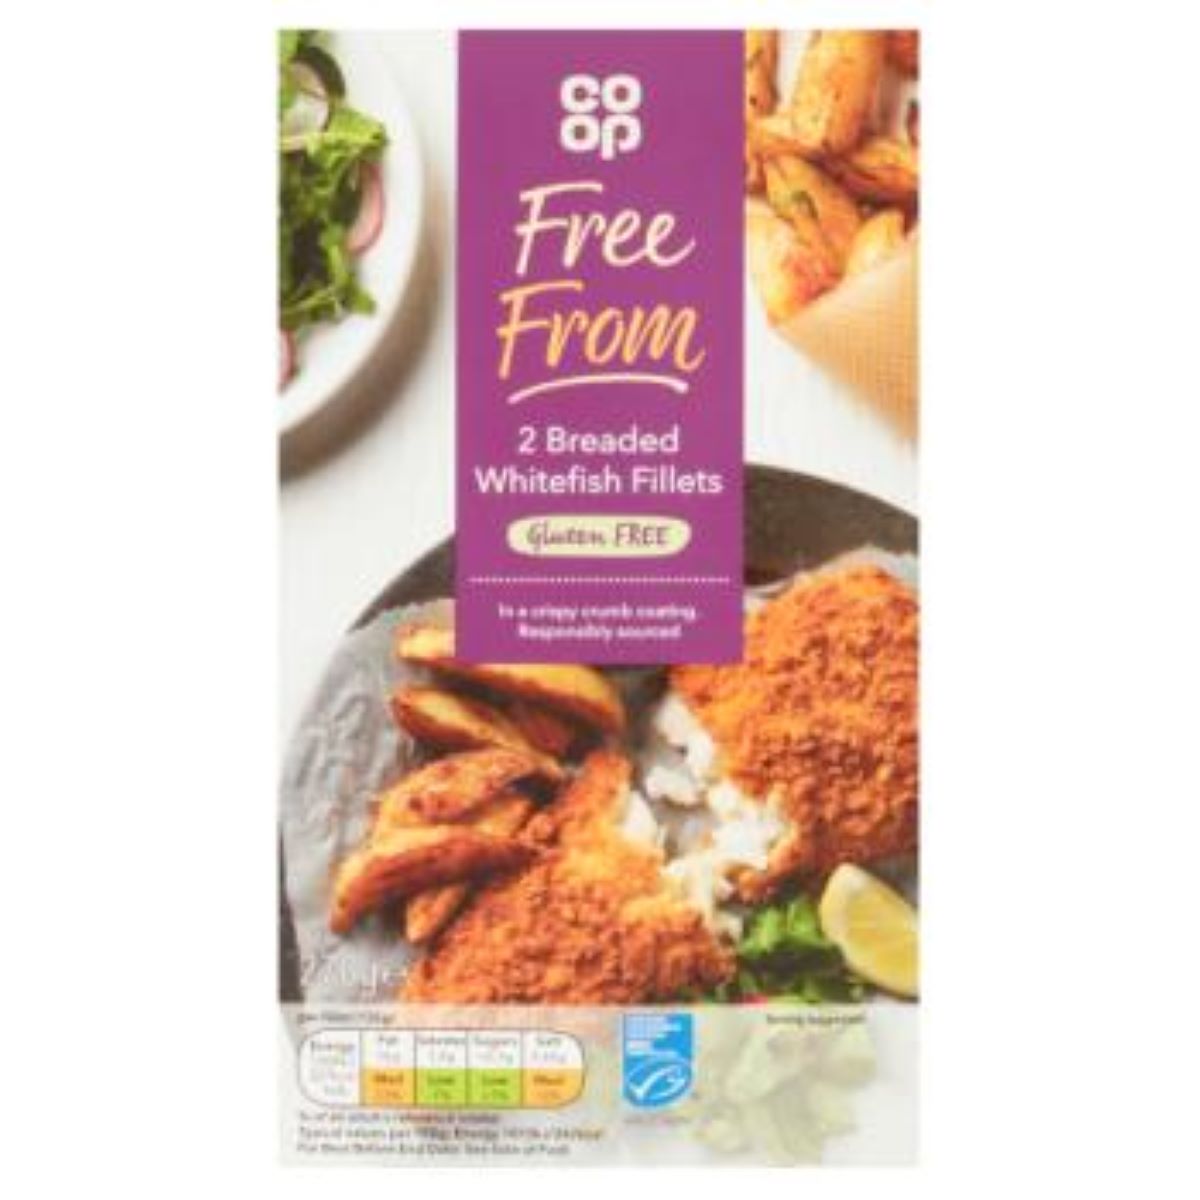 Co-op Free From 2 Breaded Whitefish Fillets 270g